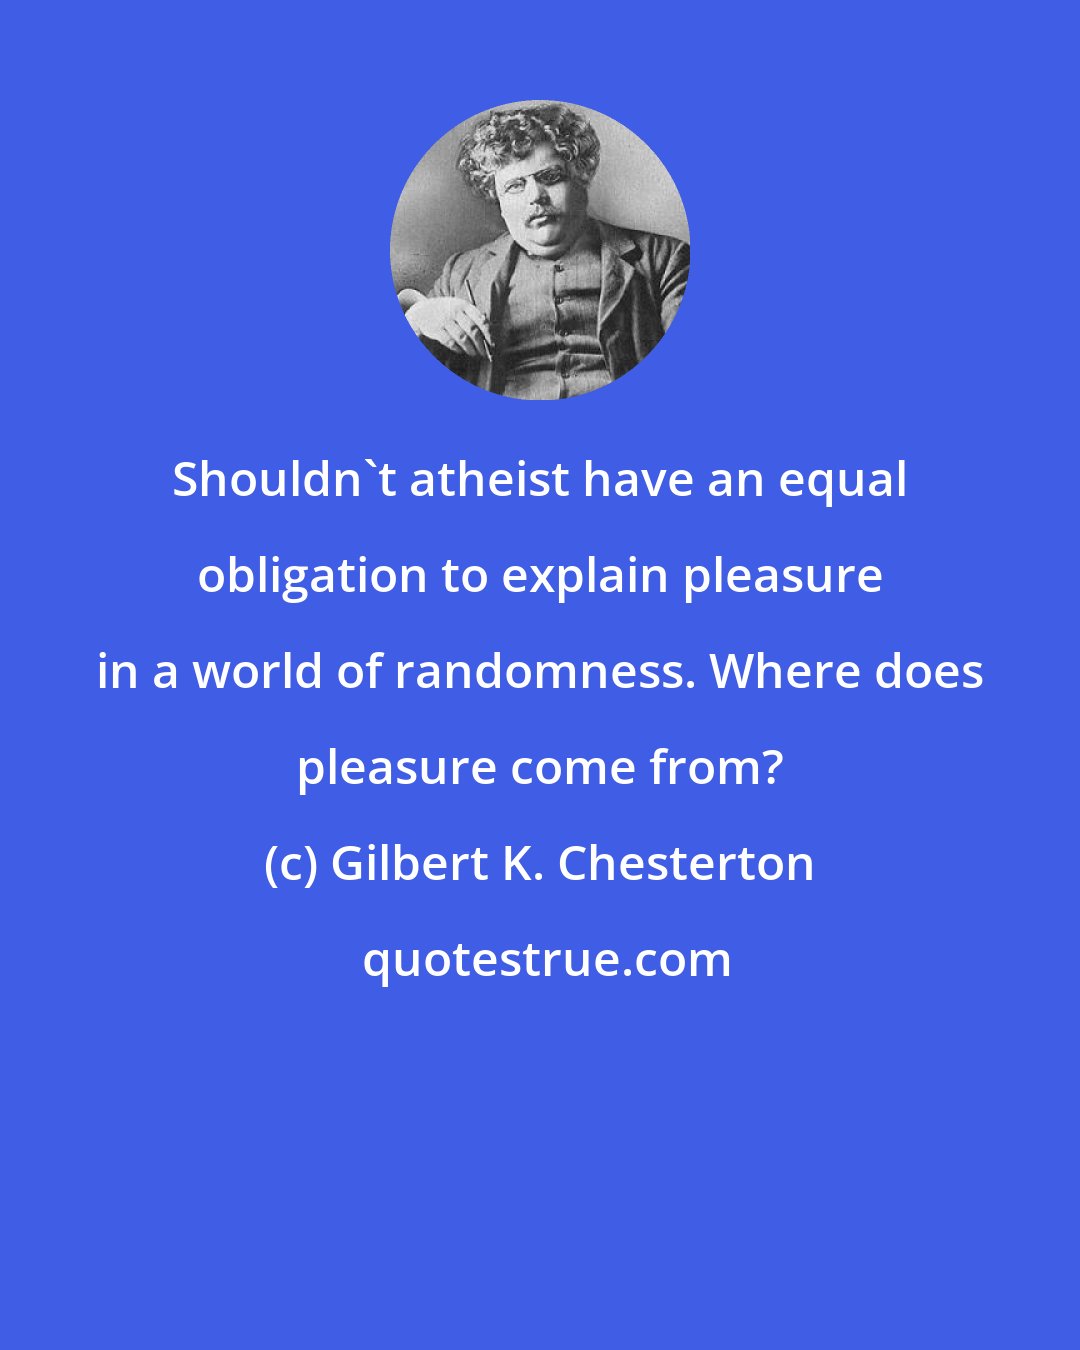 Gilbert K. Chesterton: Shouldn't atheist have an equal obligation to explain pleasure in a world of randomness. Where does pleasure come from?